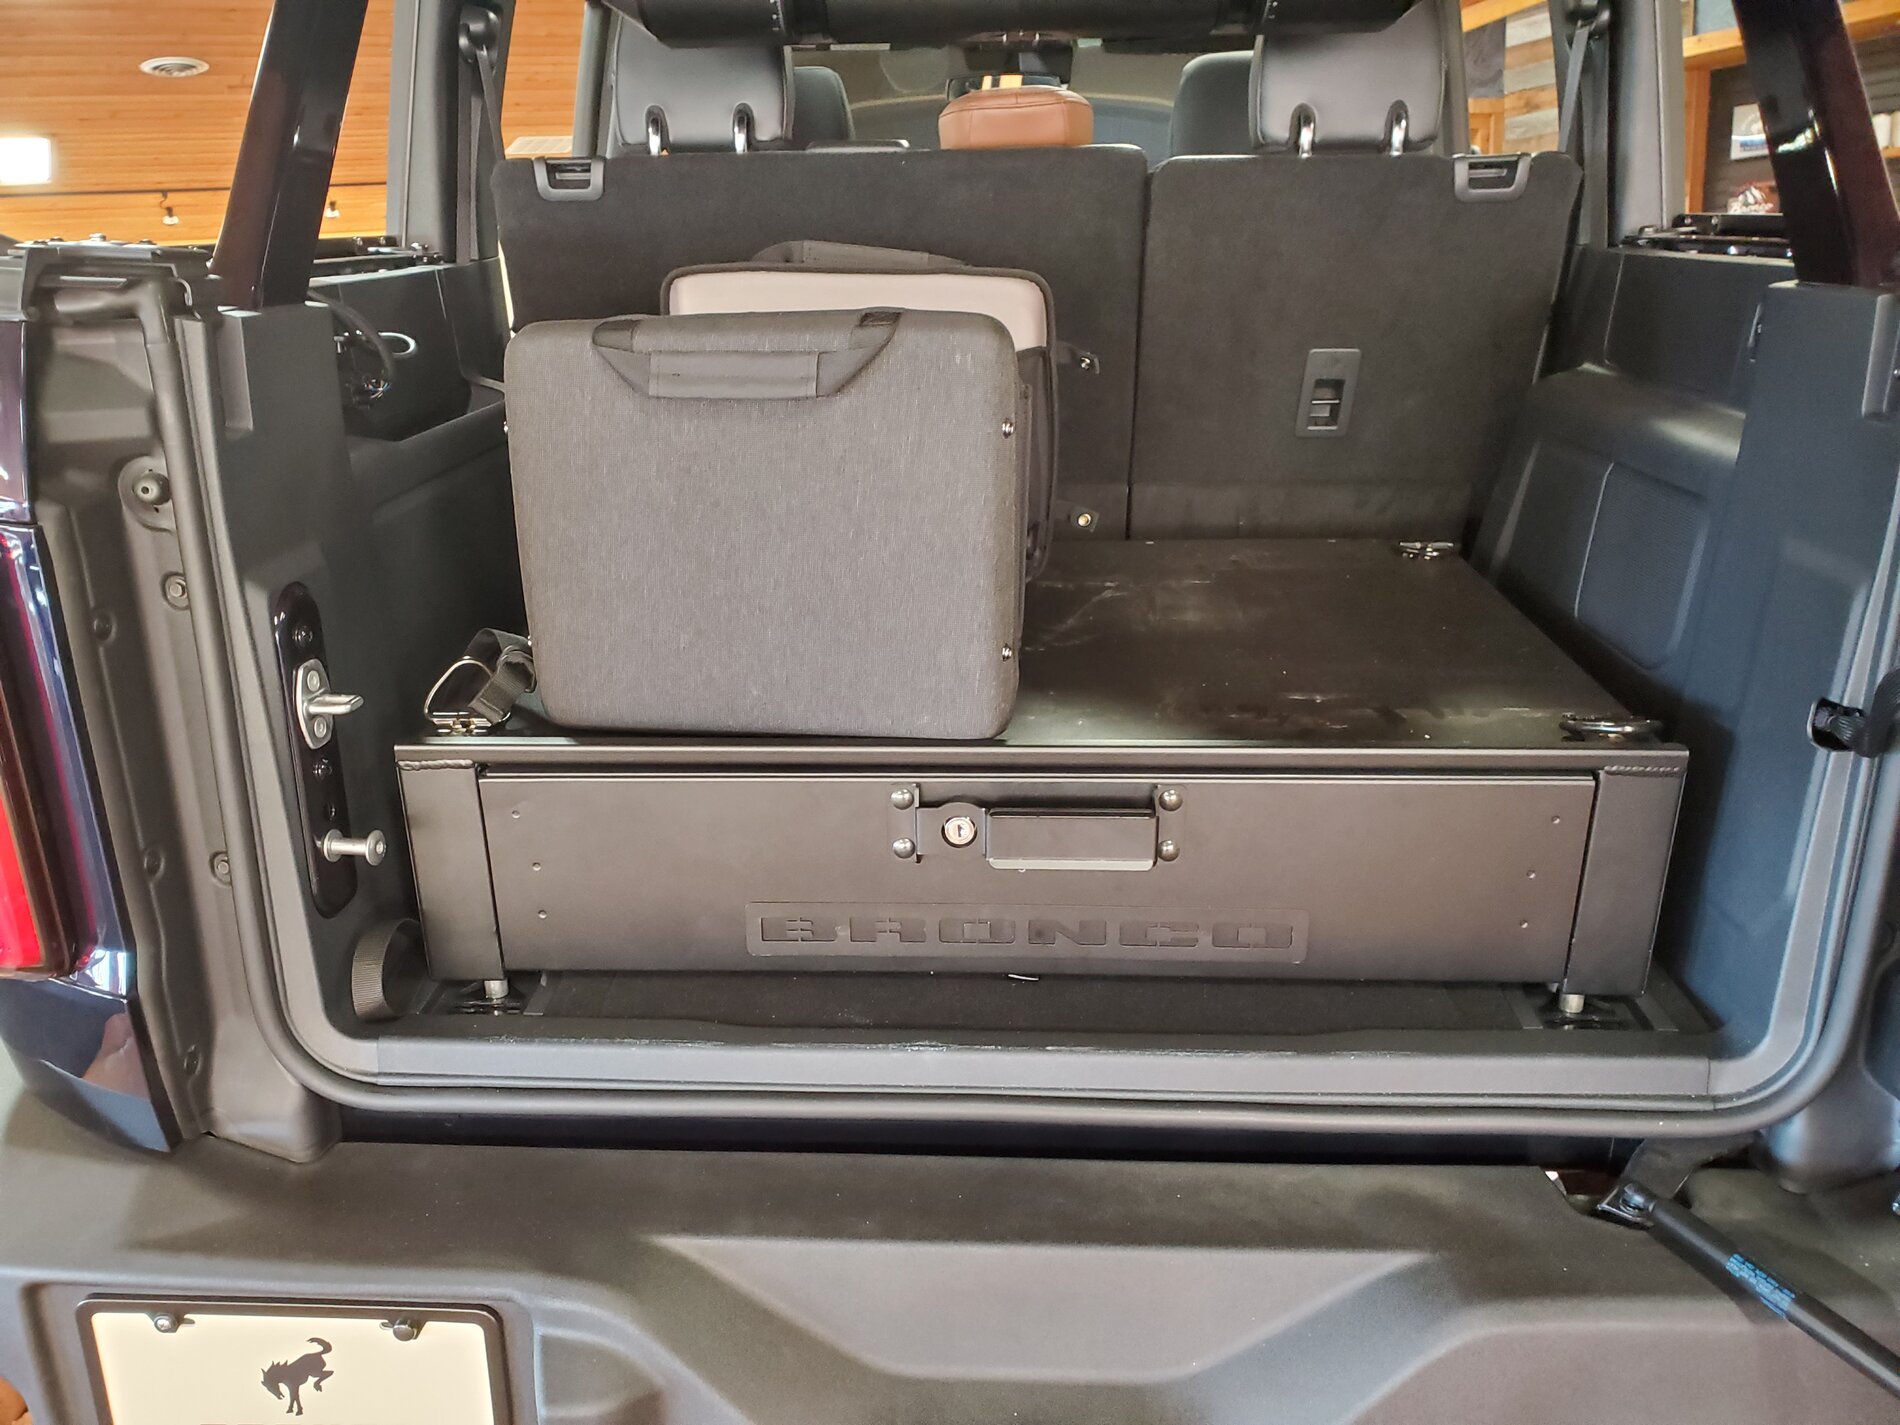 Ford Bronco Review & Pics: 2021 Bronco Cargo Area Security Drawer 20210915_092745